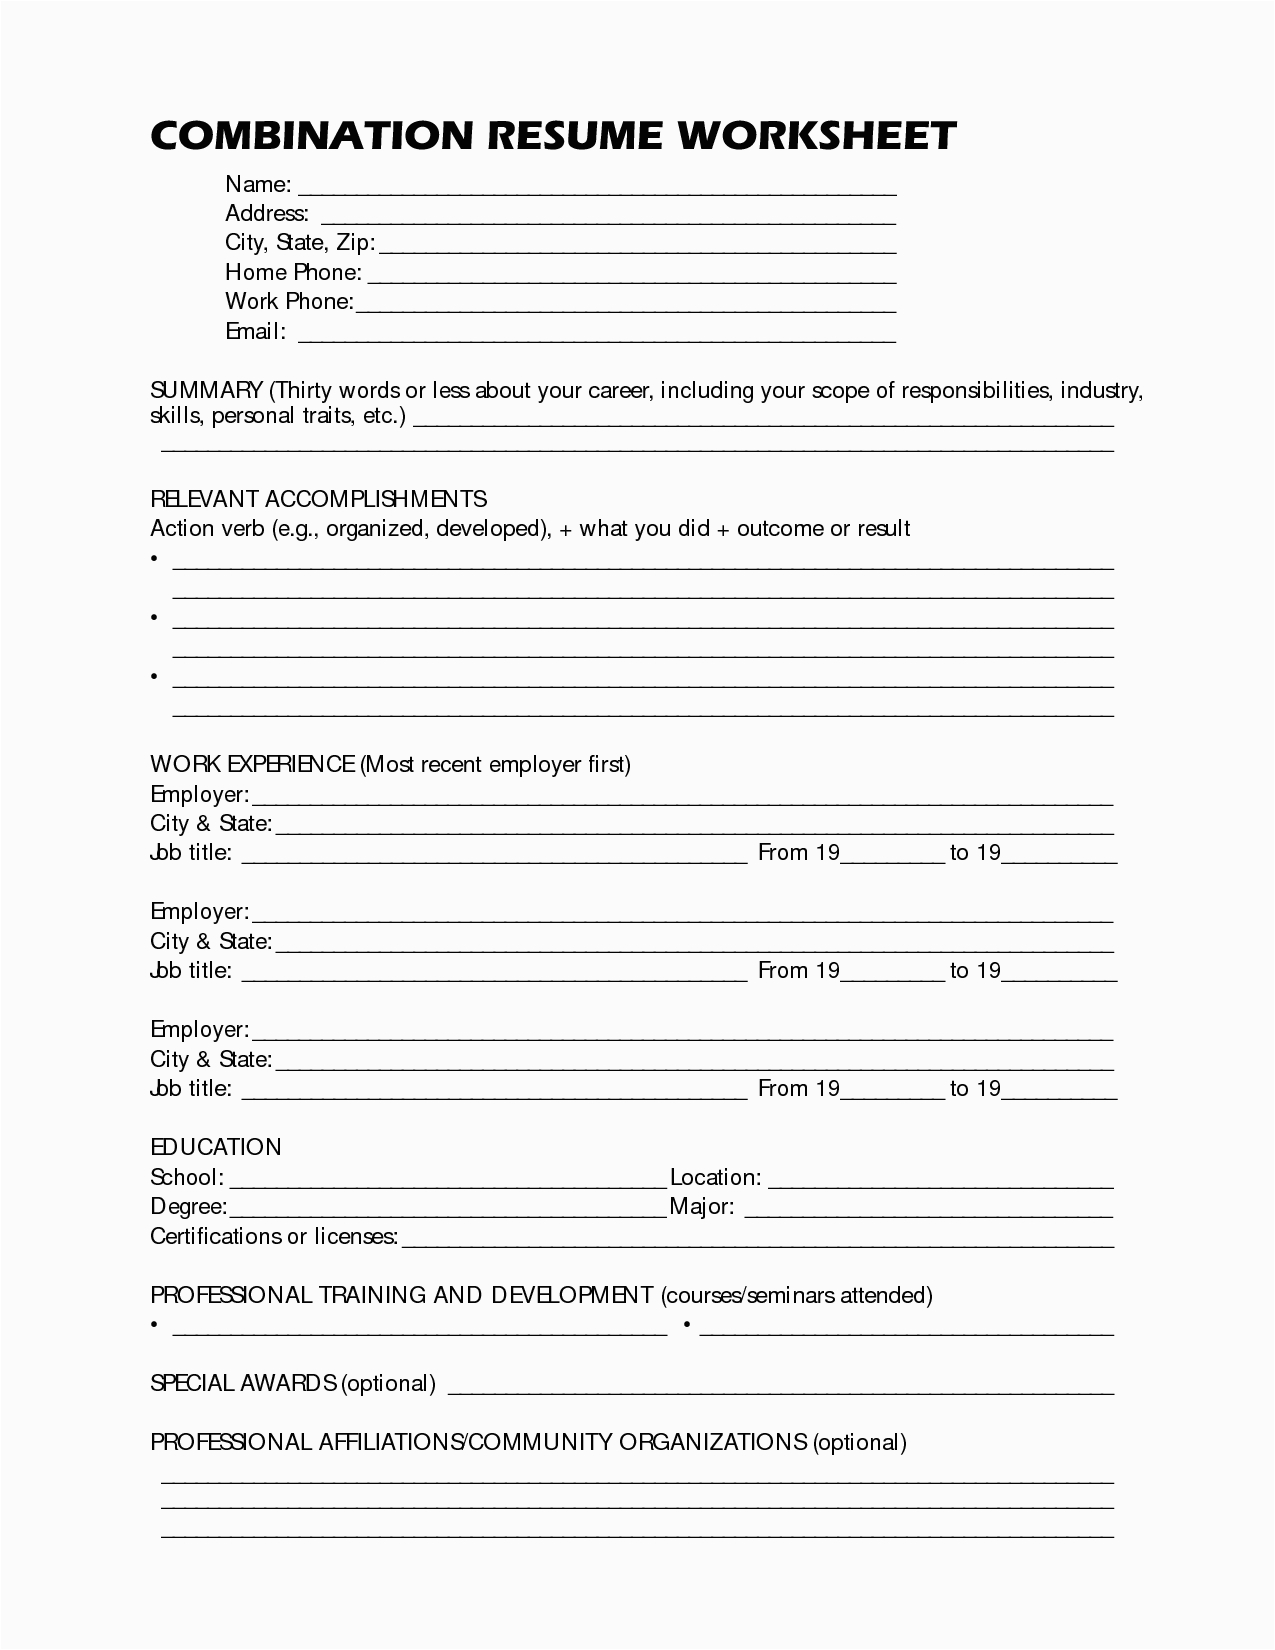 Fill In the Blank Resume Template for Highschool Students Wonderful Fill In the Blank Resume Template for Highschool